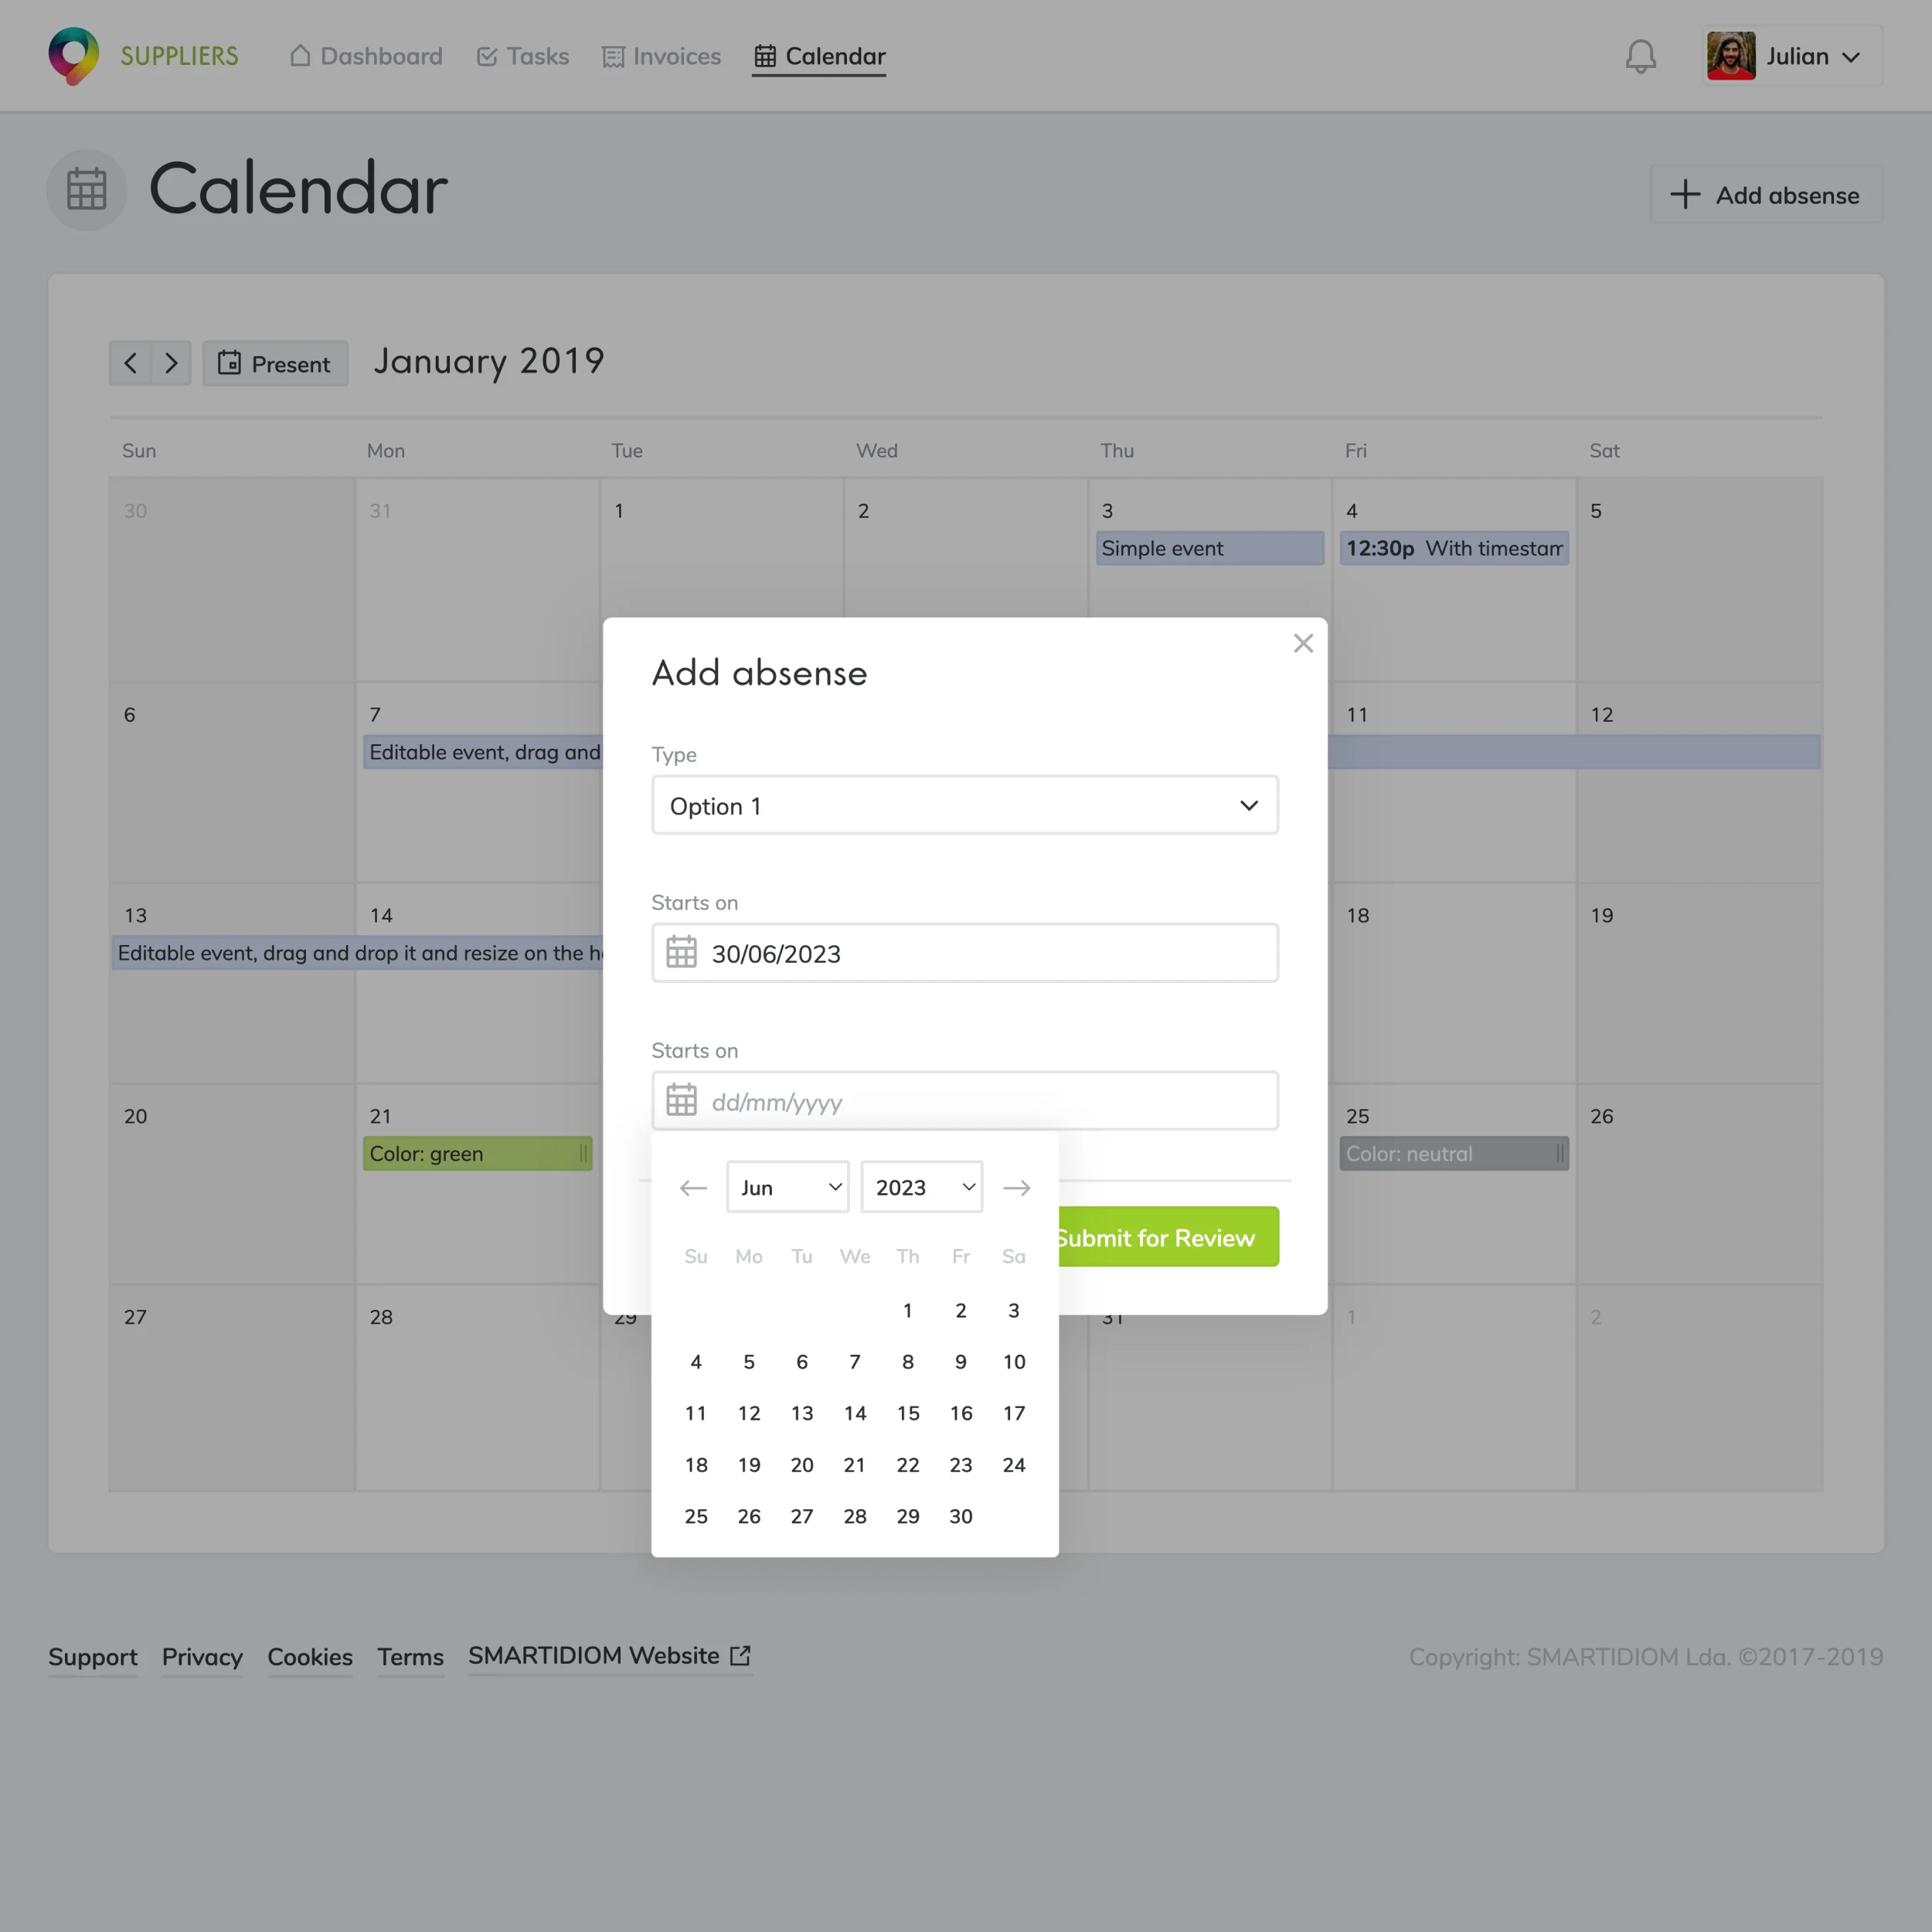 View of the calendar with a modal window prompting the user to add an absence by defining the type and then the dates.